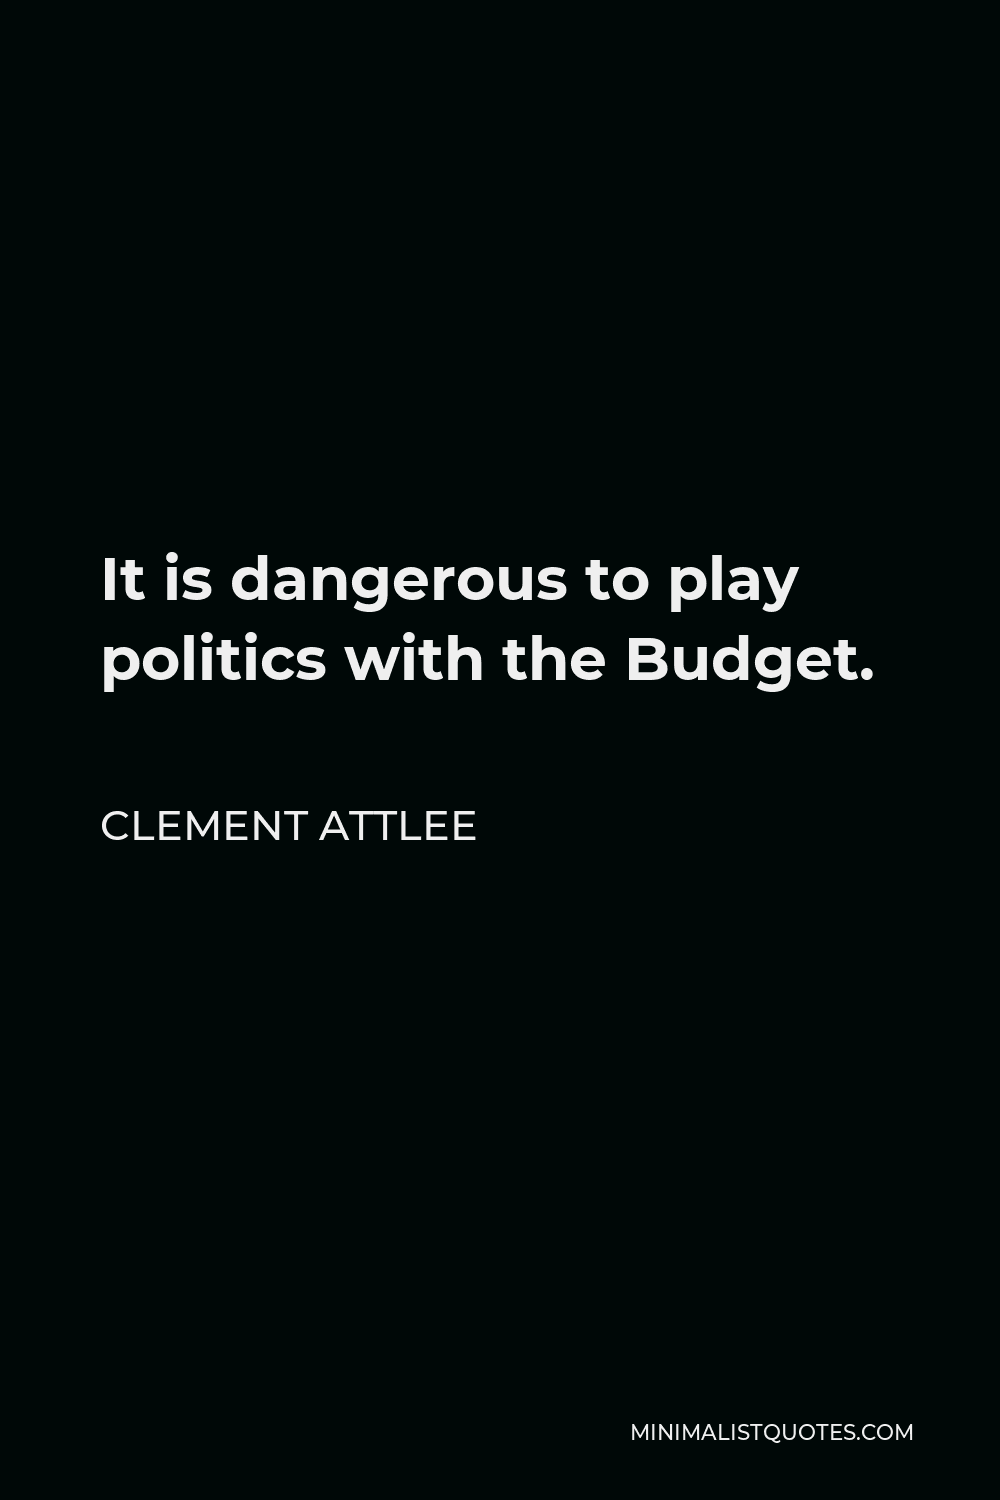 Clement Attlee Quote - It is dangerous to play politics with the Budget.